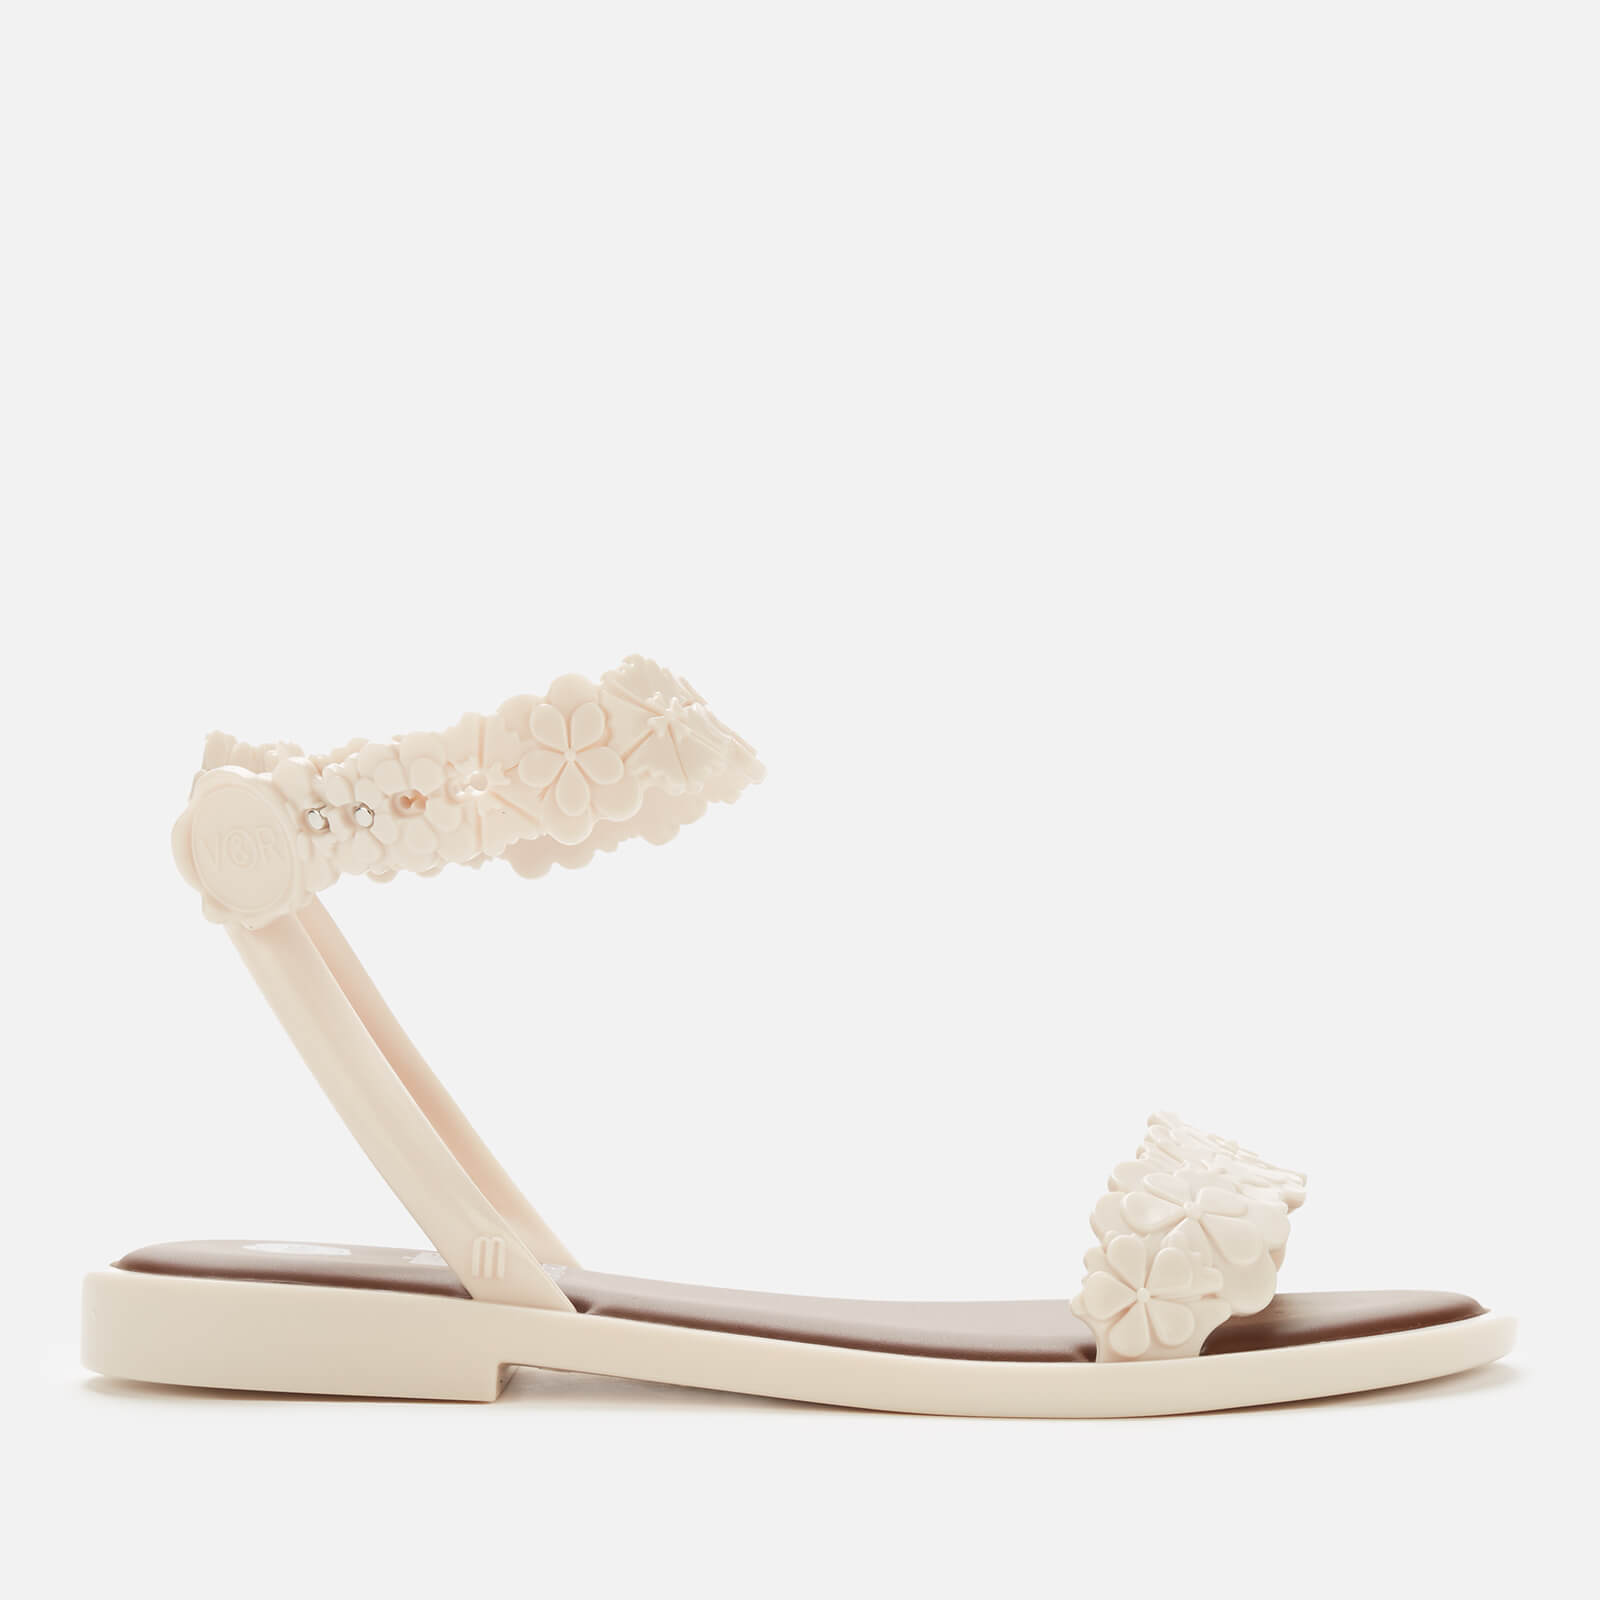 Melissa X Viktor and Rolf Women%27s Blossom Wave Sandals - Ivory Contrast